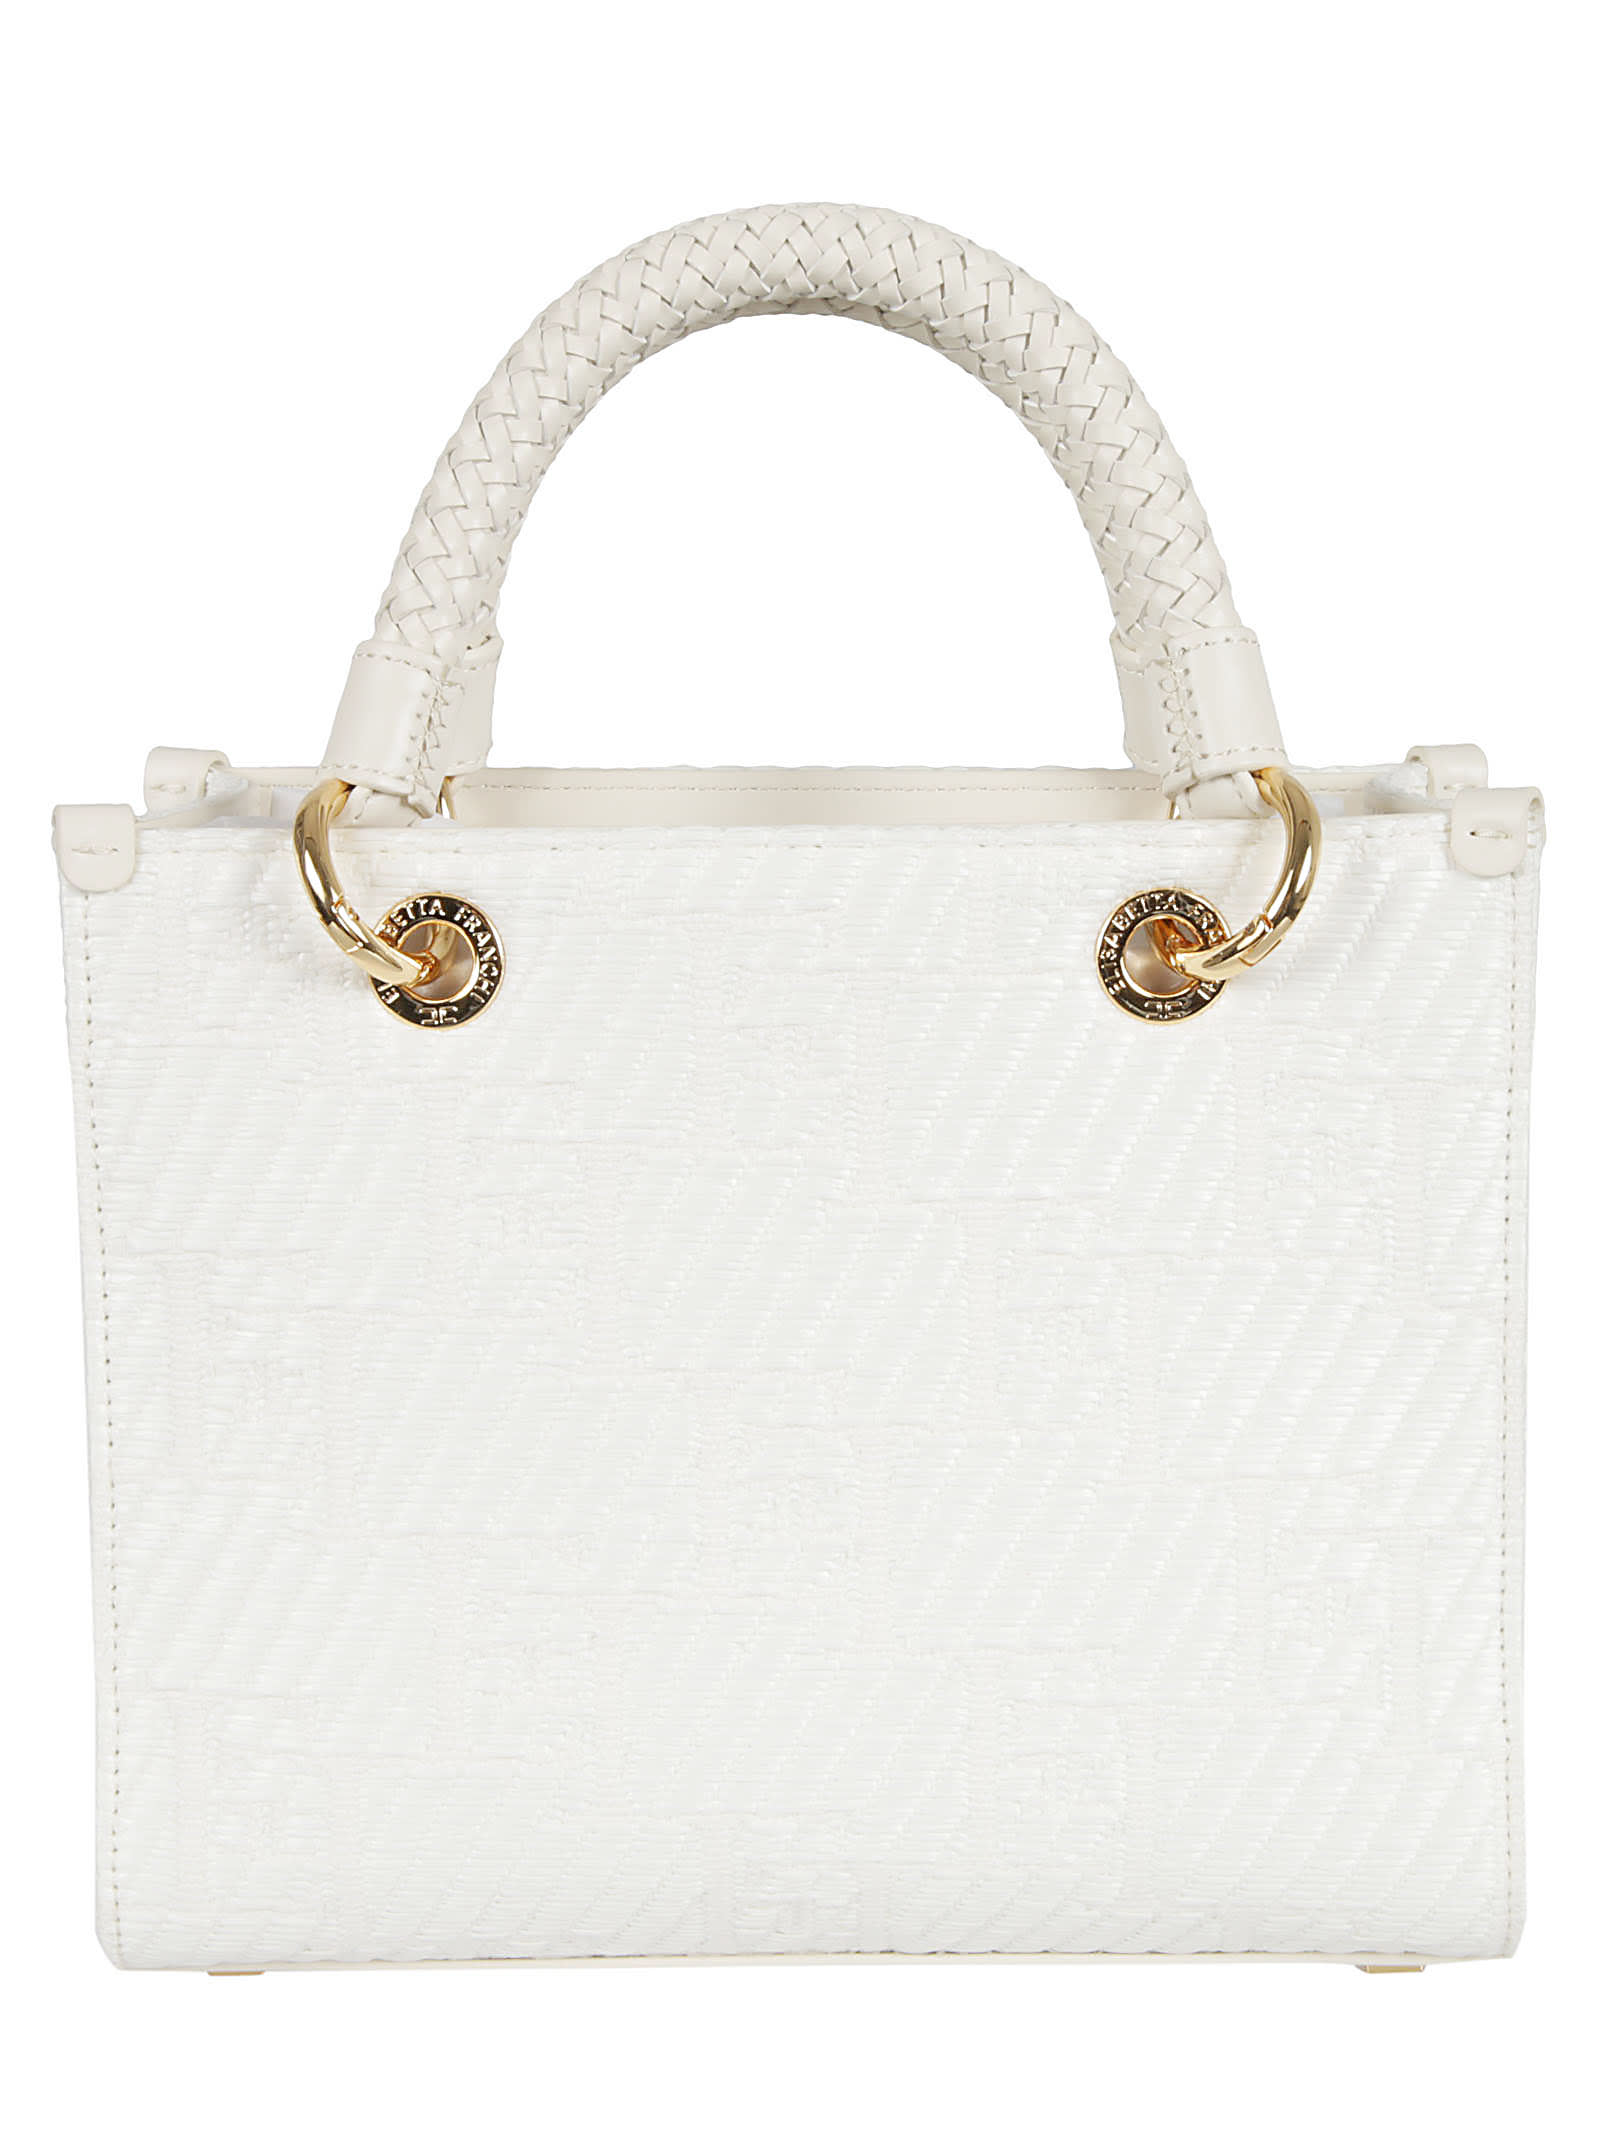 Elisabetta Franchi Woven Top Handle Patterned Tote In Avorio